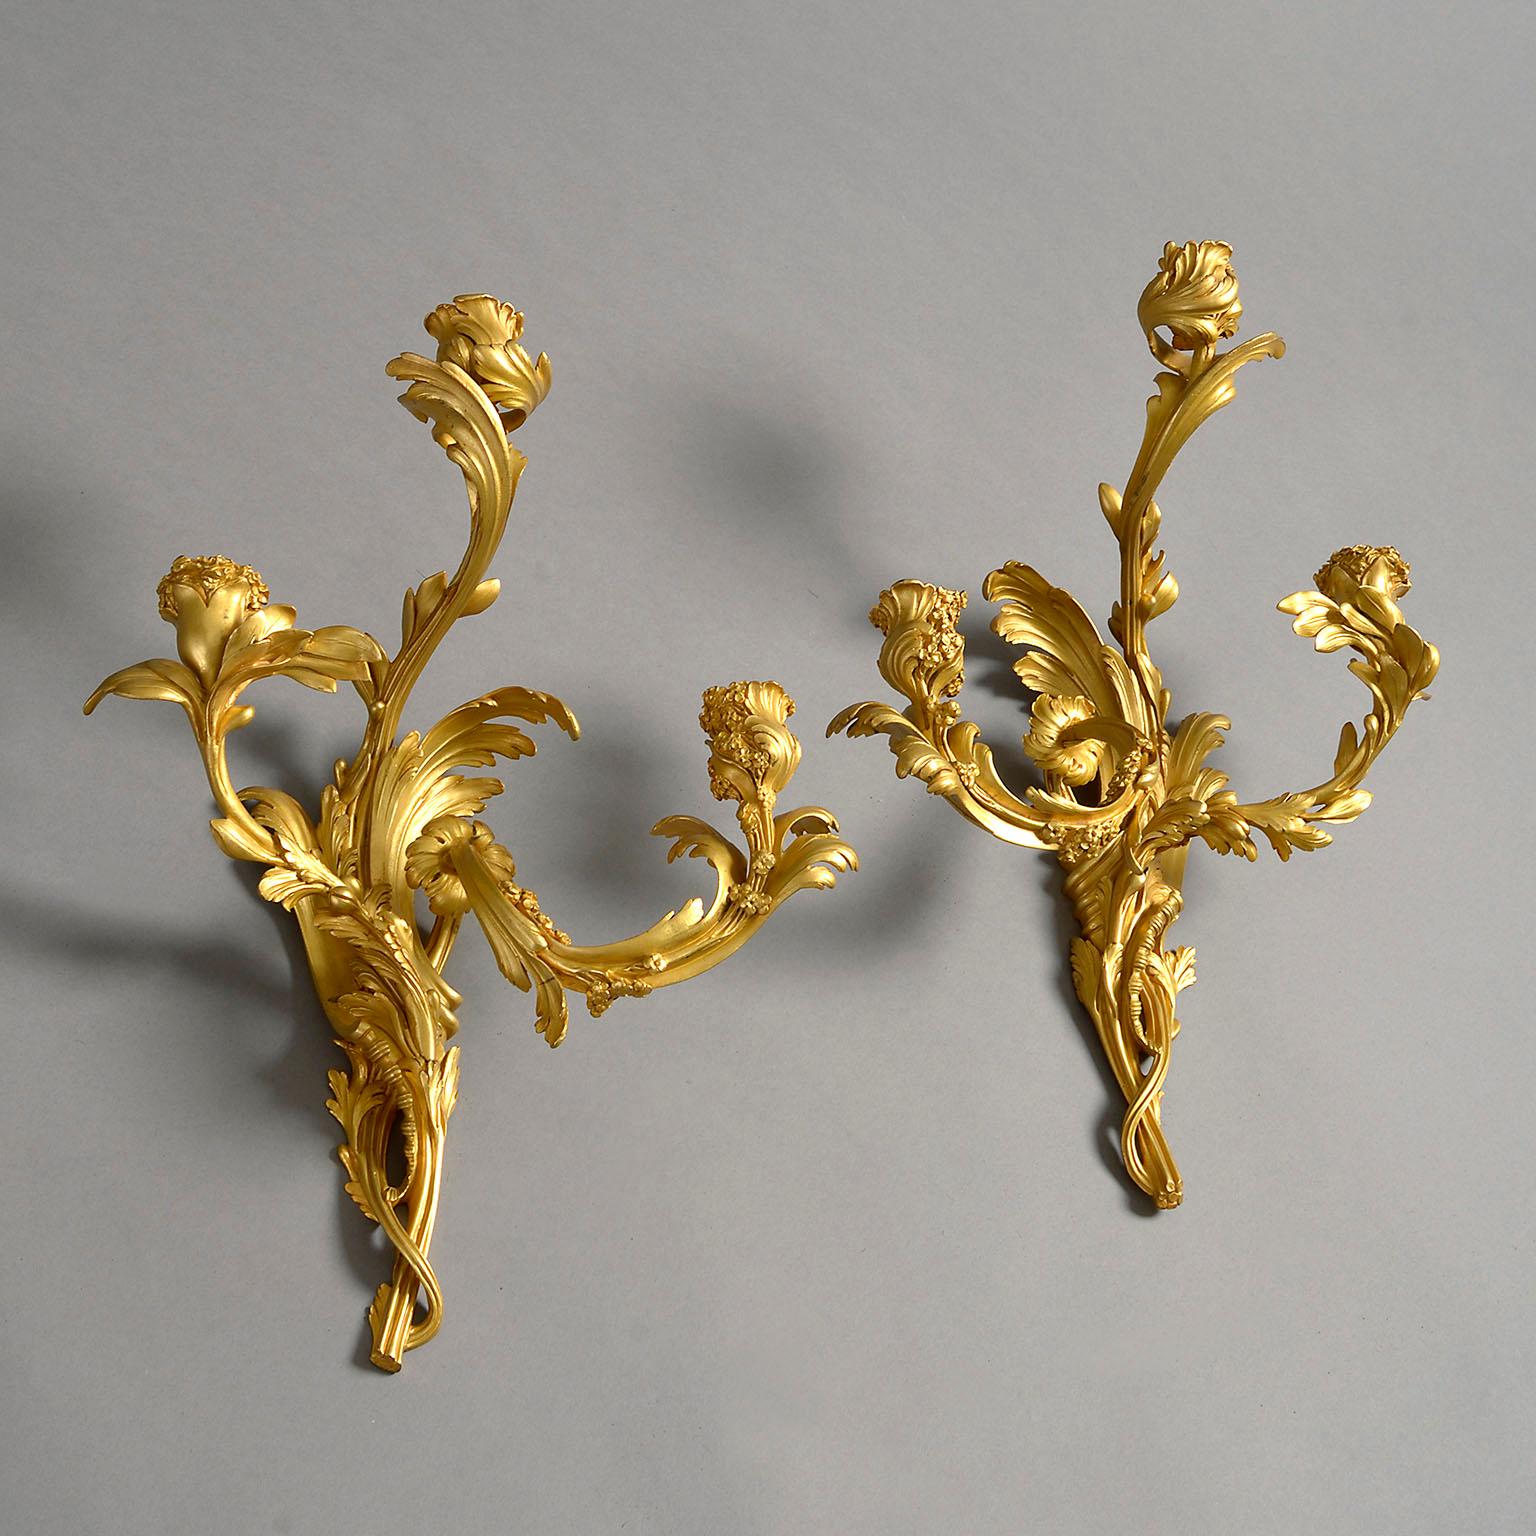 Exceptionally well modelled, each naturalistically formed with three-branches with lamp holders, formed from leaves and flowers. Wired for electricity

A set of four wall lights of the same model signed ‘Henri Dasson’ sold Christie’s London, South